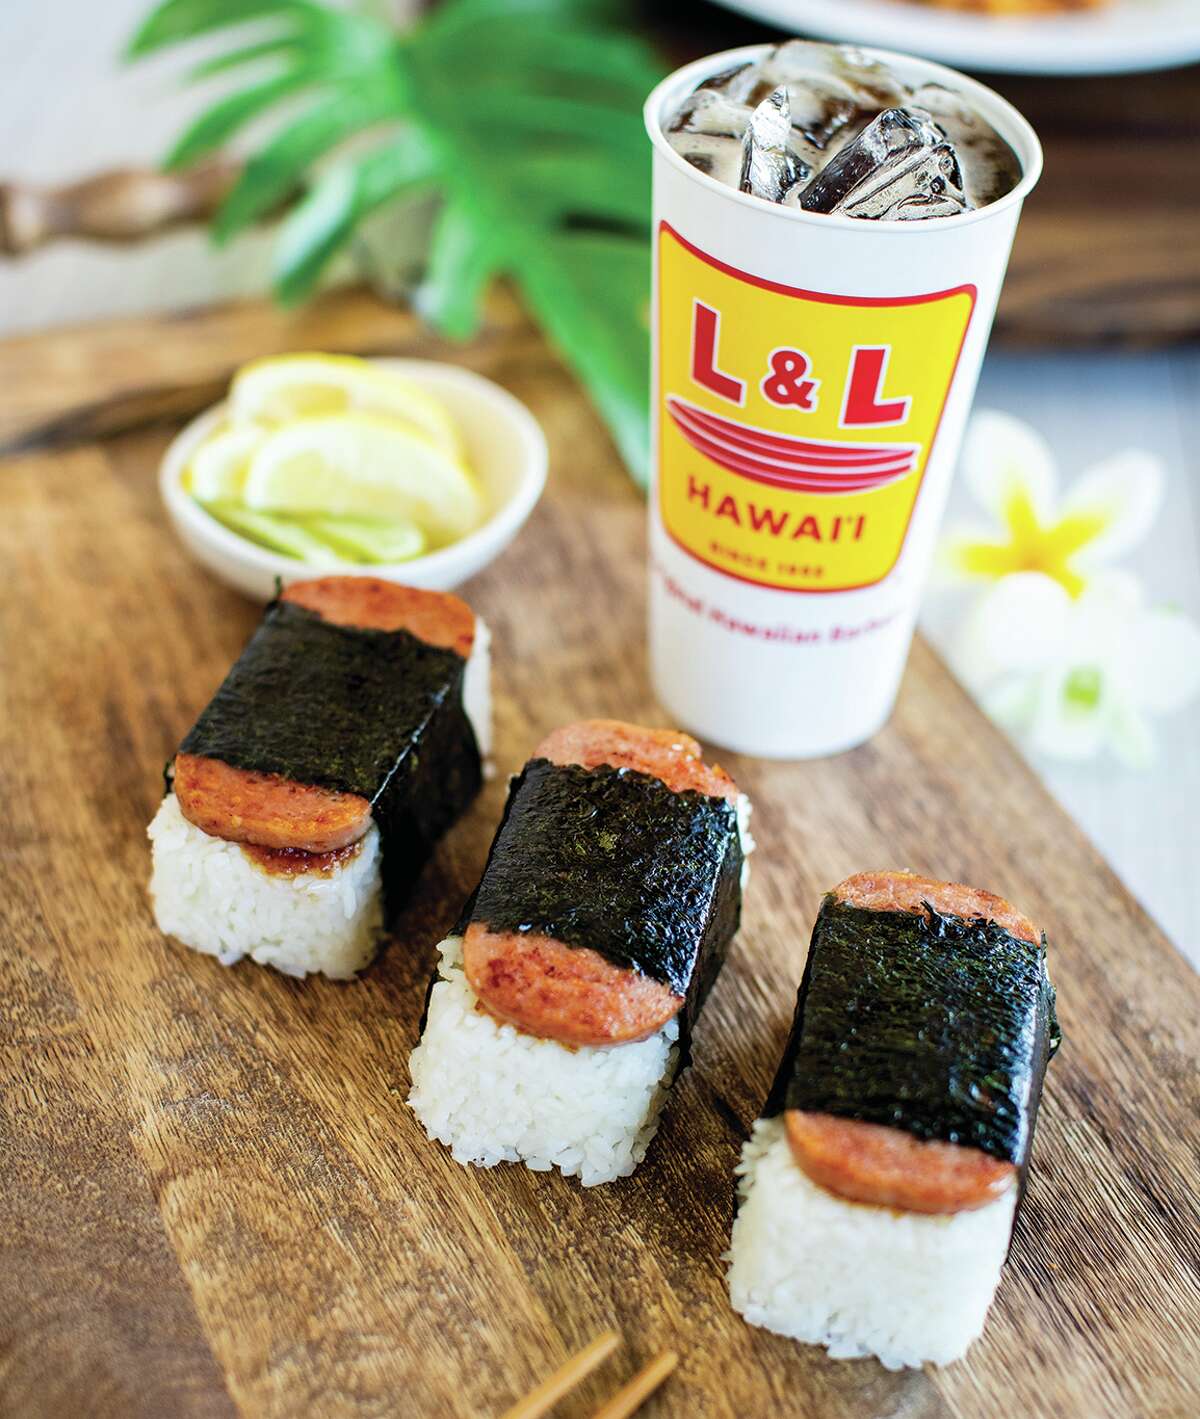 The Spam musubi is the most sold item at L&L restaurants in the continental U.S.